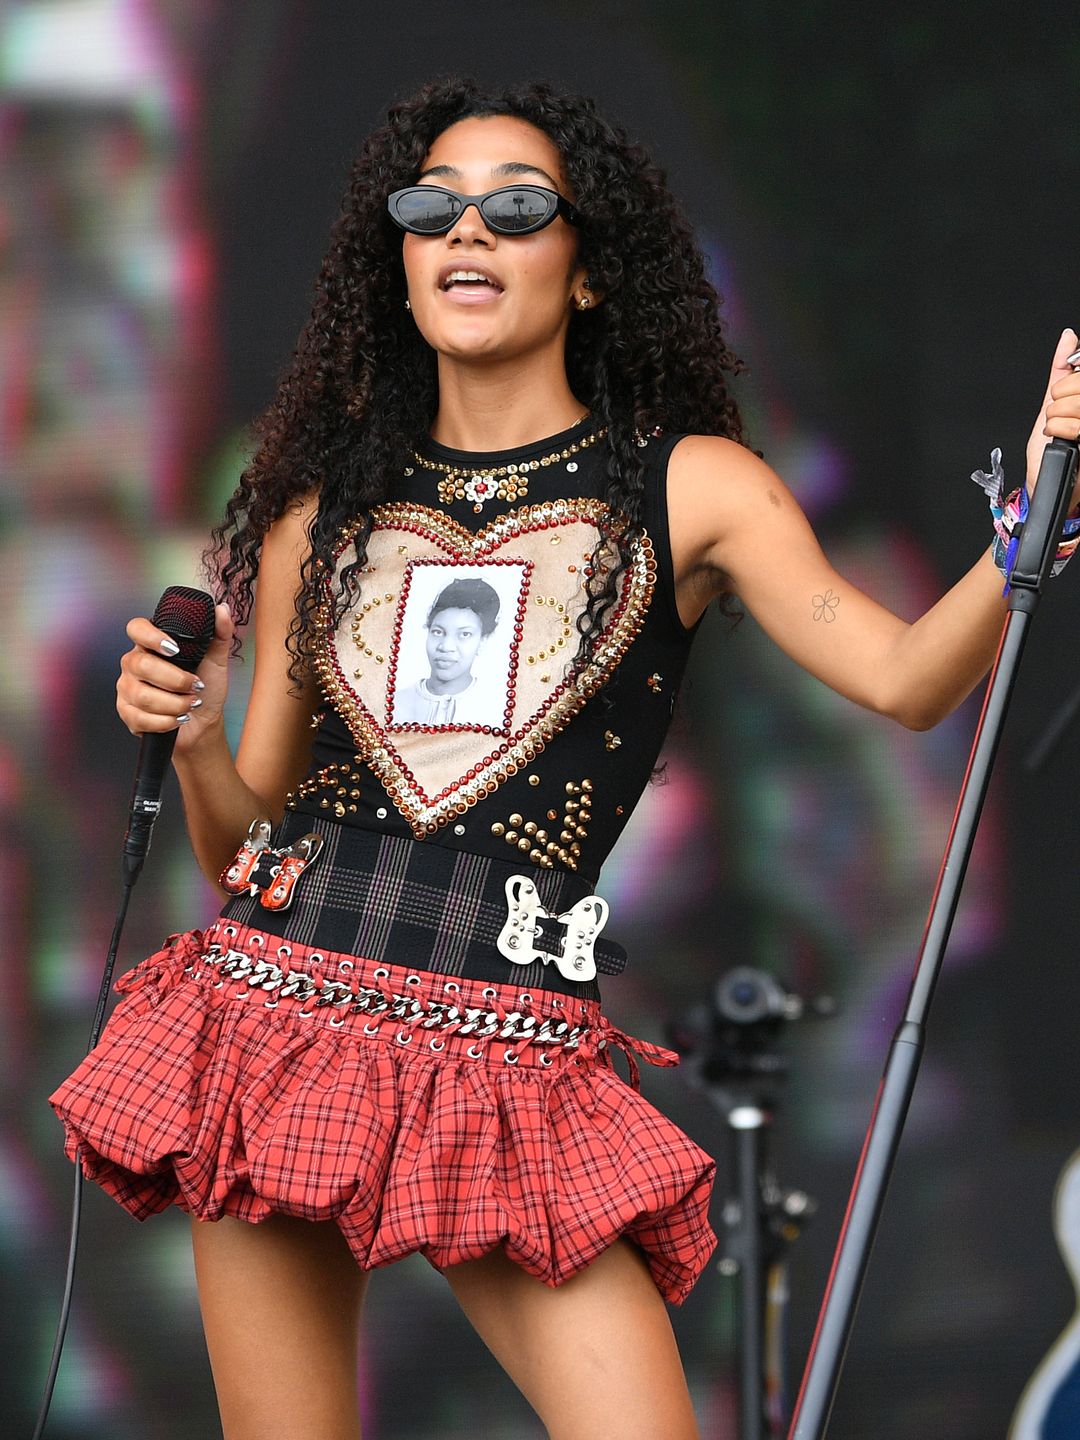 Olivia Dean performs on the Pyramid Stage during day three of the Glastonbury Festival wearing a puffy tartan mini skirt